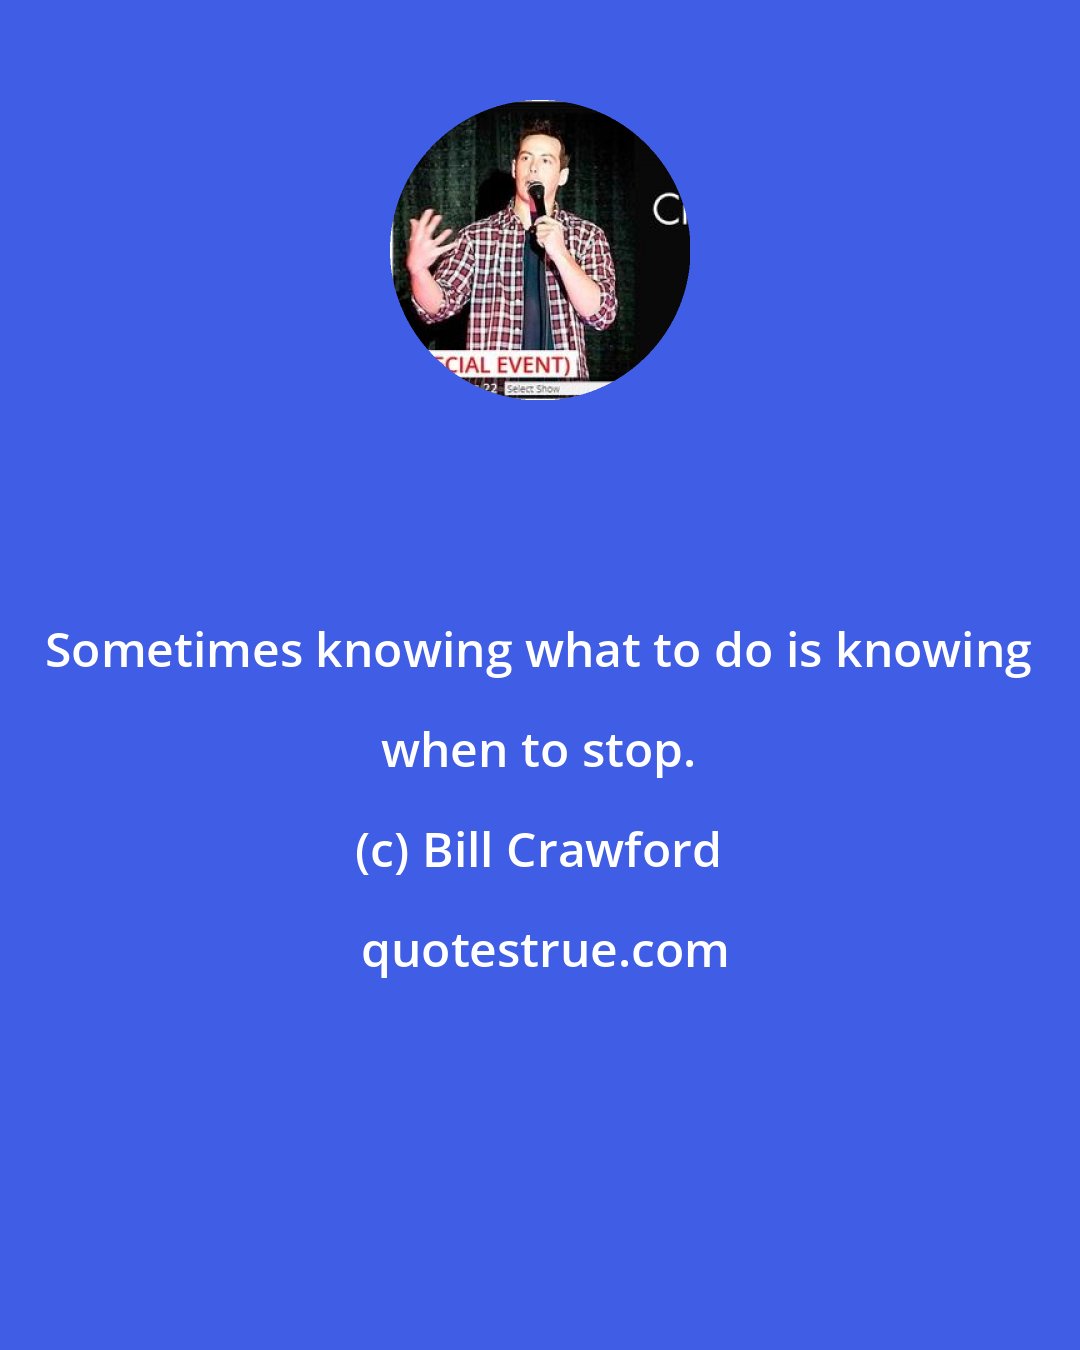 Bill Crawford: Sometimes knowing what to do is knowing when to stop.